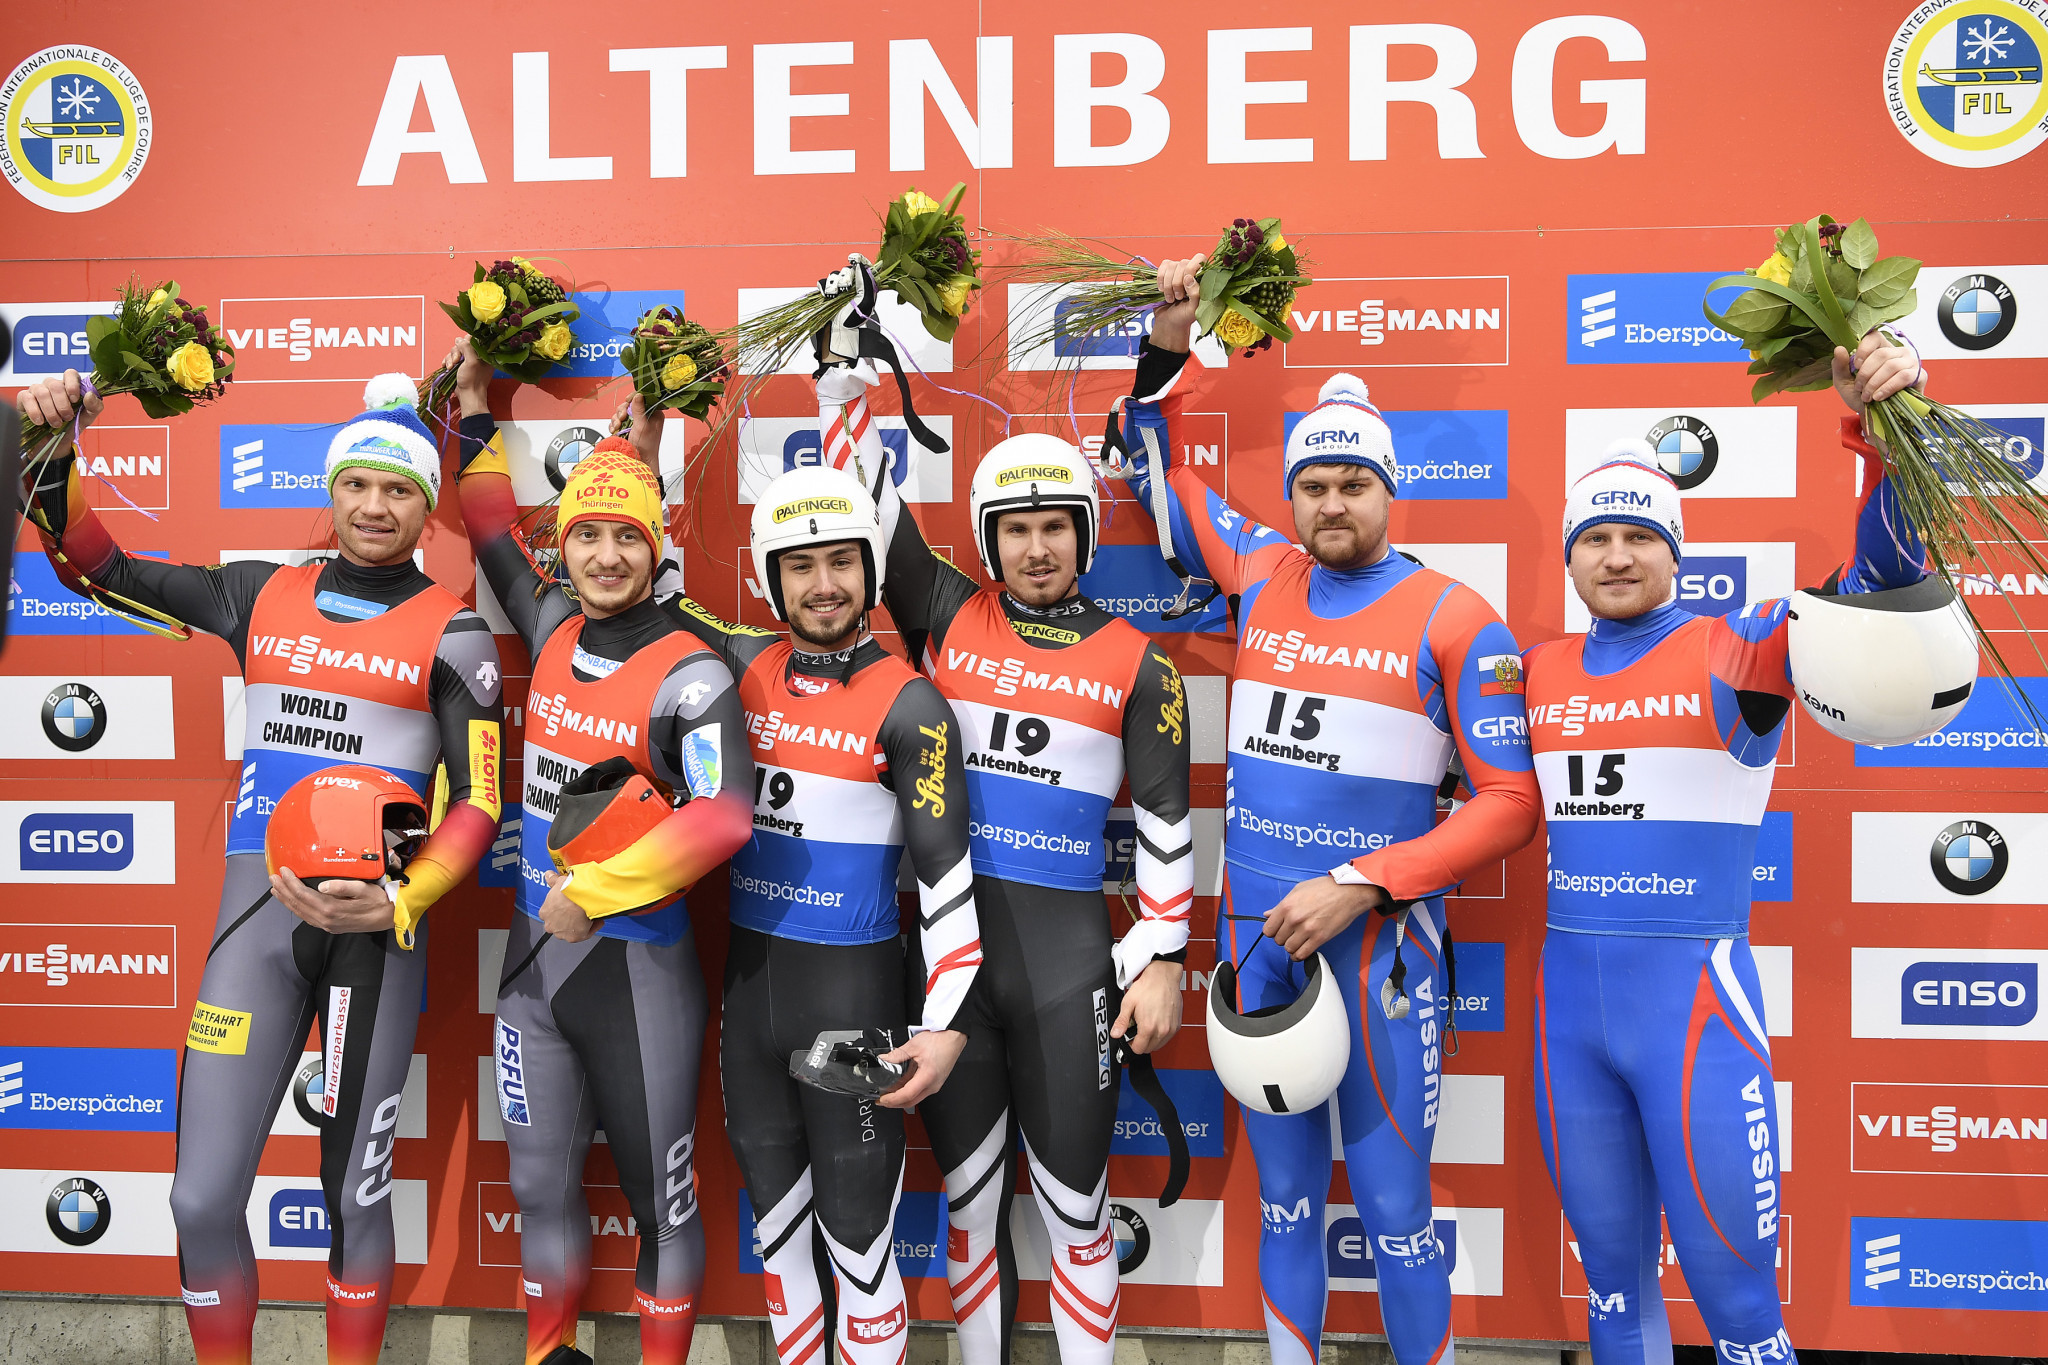 Altenberg has been announced as the host of the 2024 Luge World Championships ©FIL